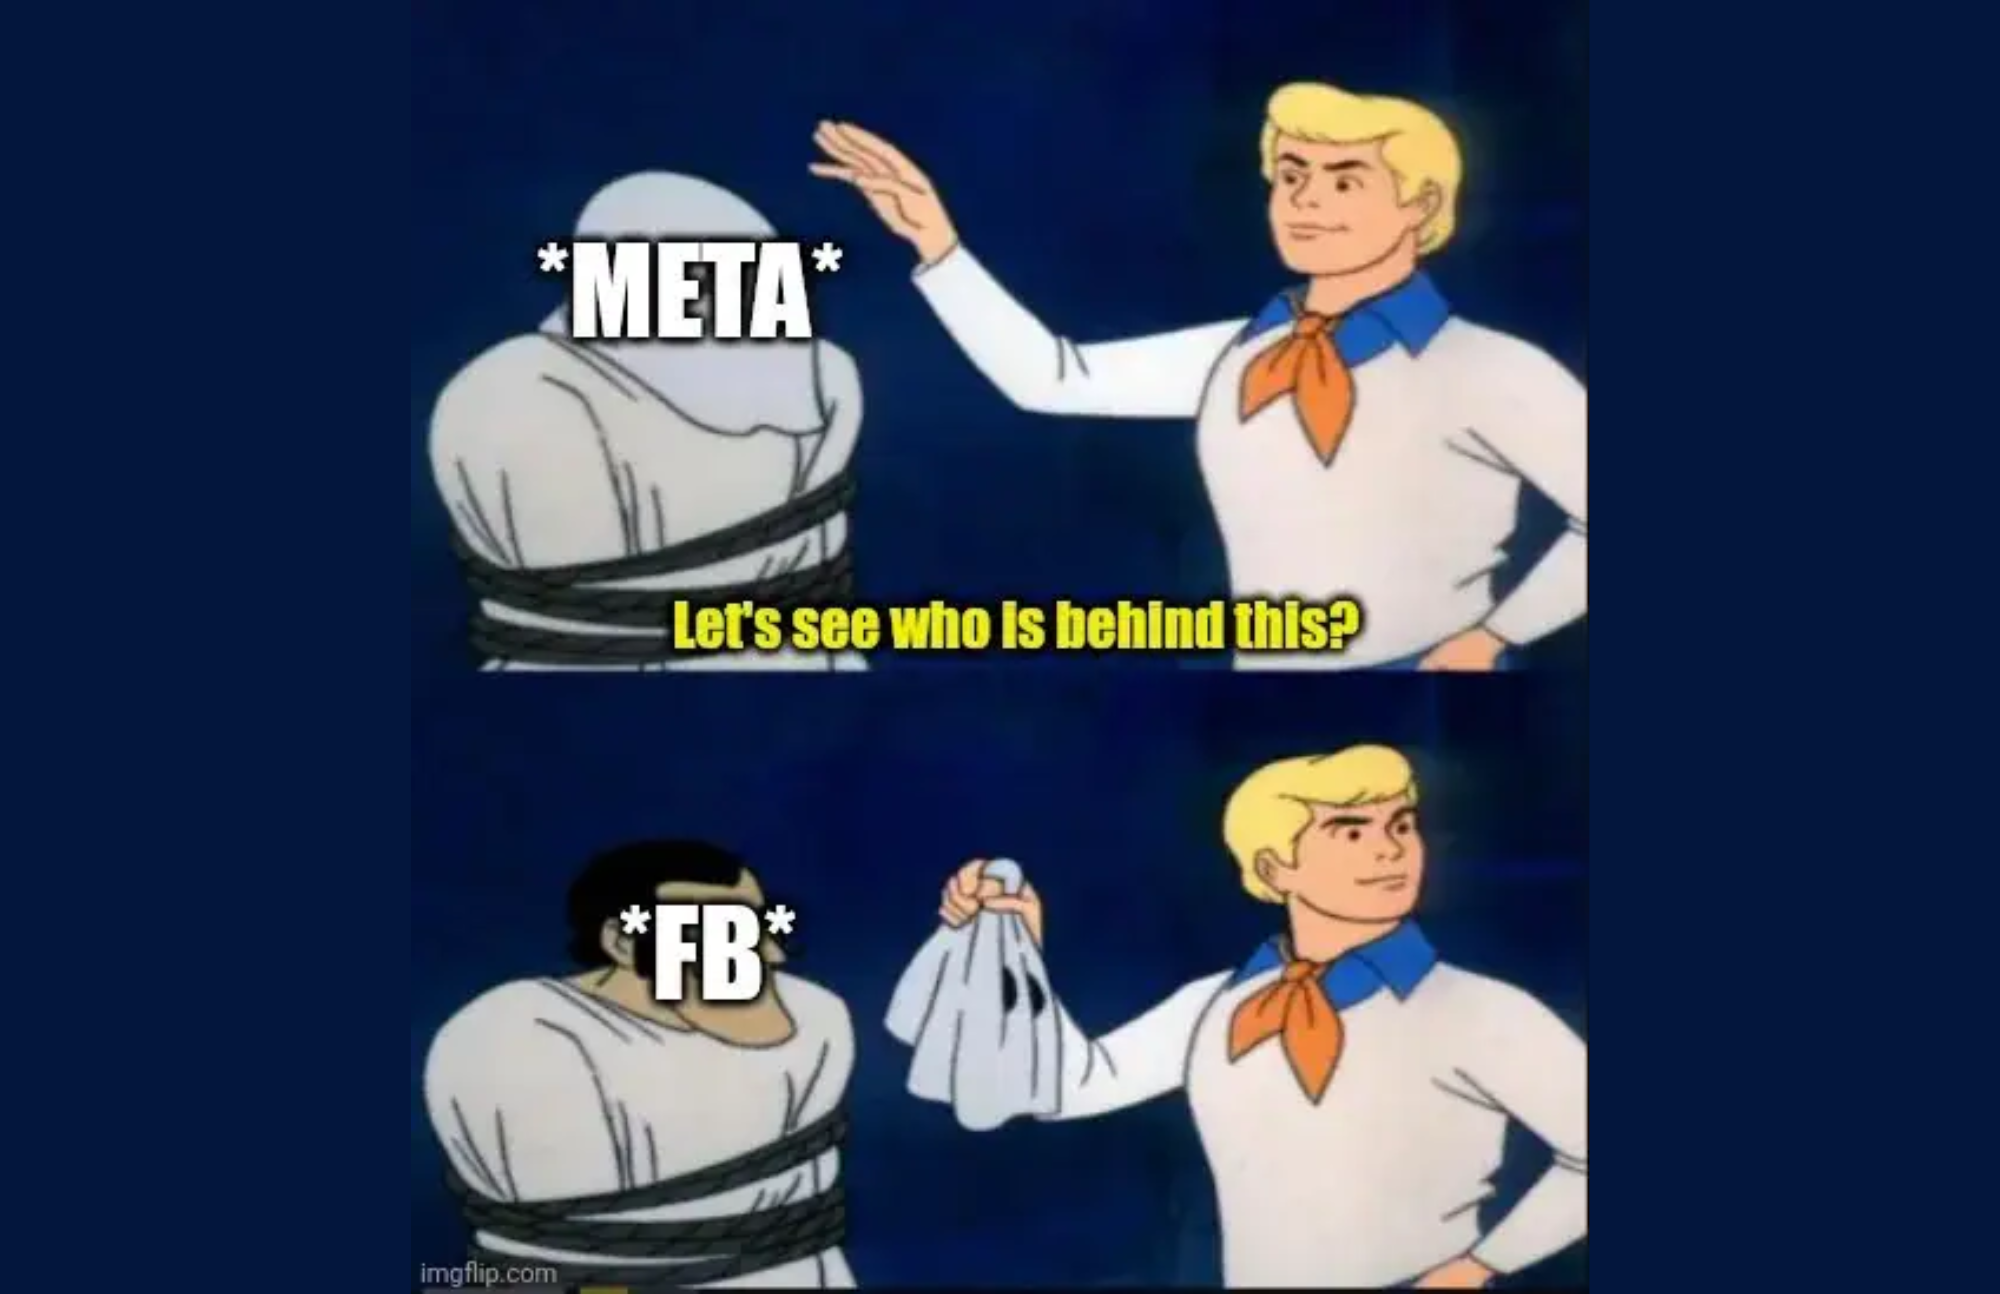 A man with yellow hair unmasked the metaman and discovered Facebook